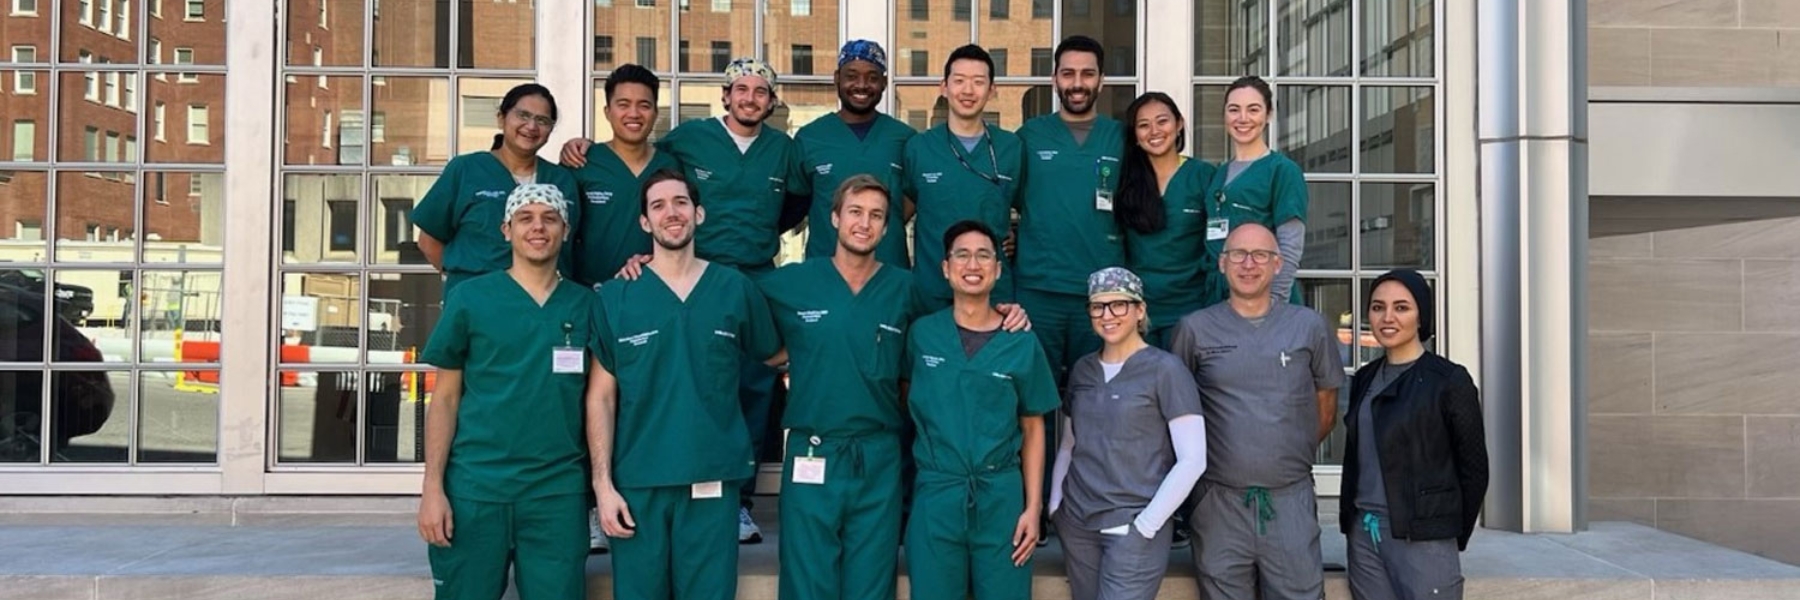 Faculty, staff, and residents from the periodontology department.